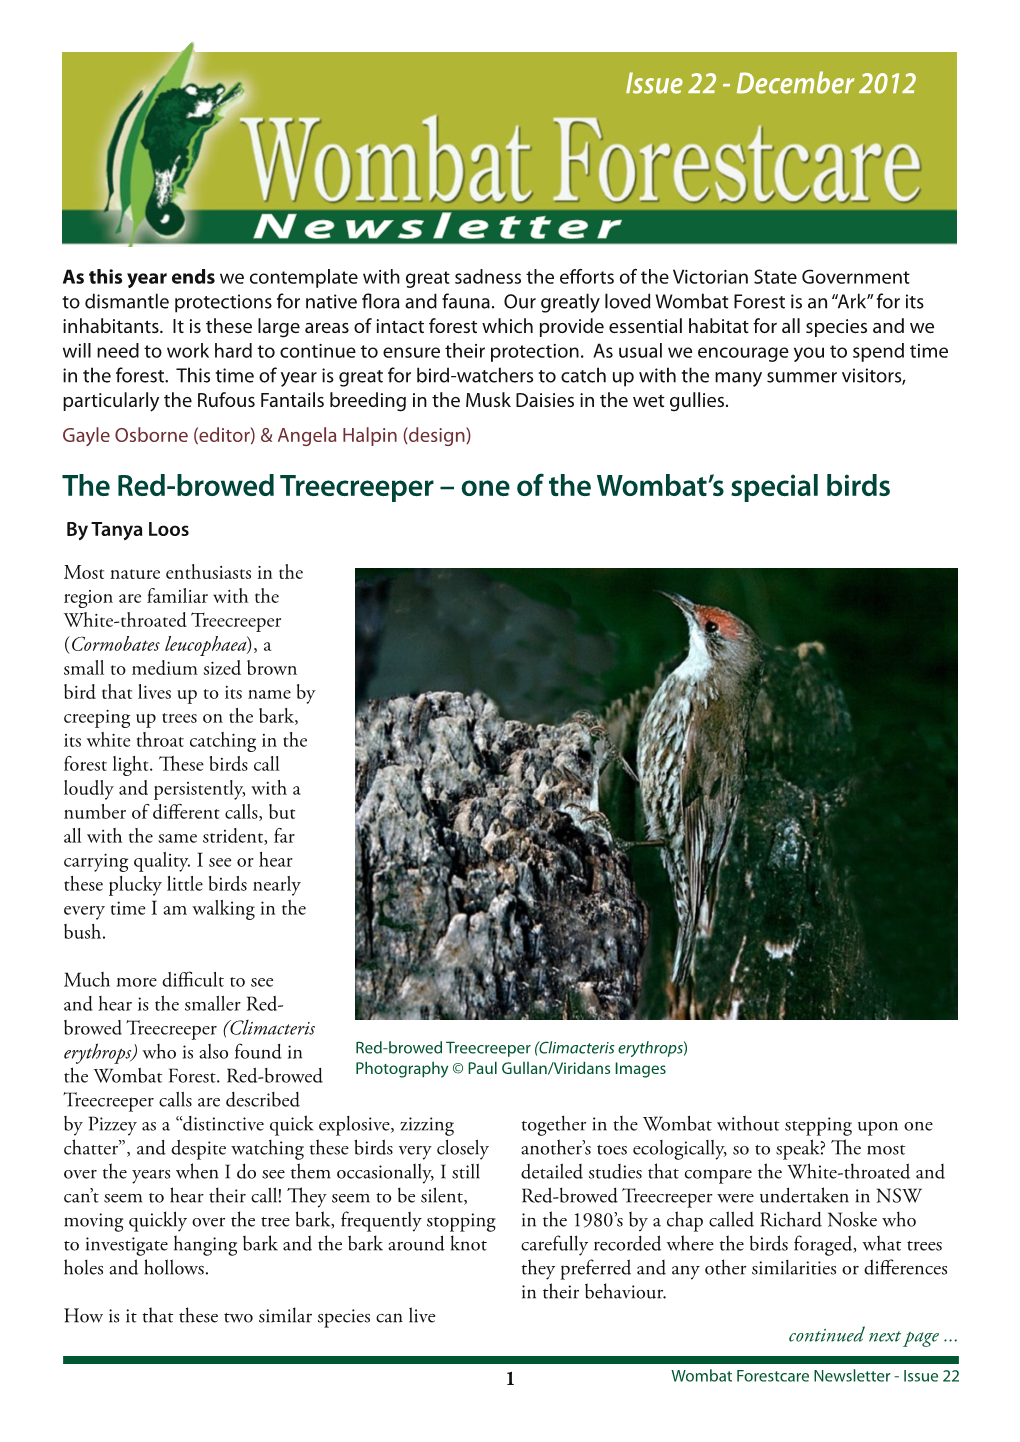 December 2012 Newsletter the Red-Browed Treecreeper